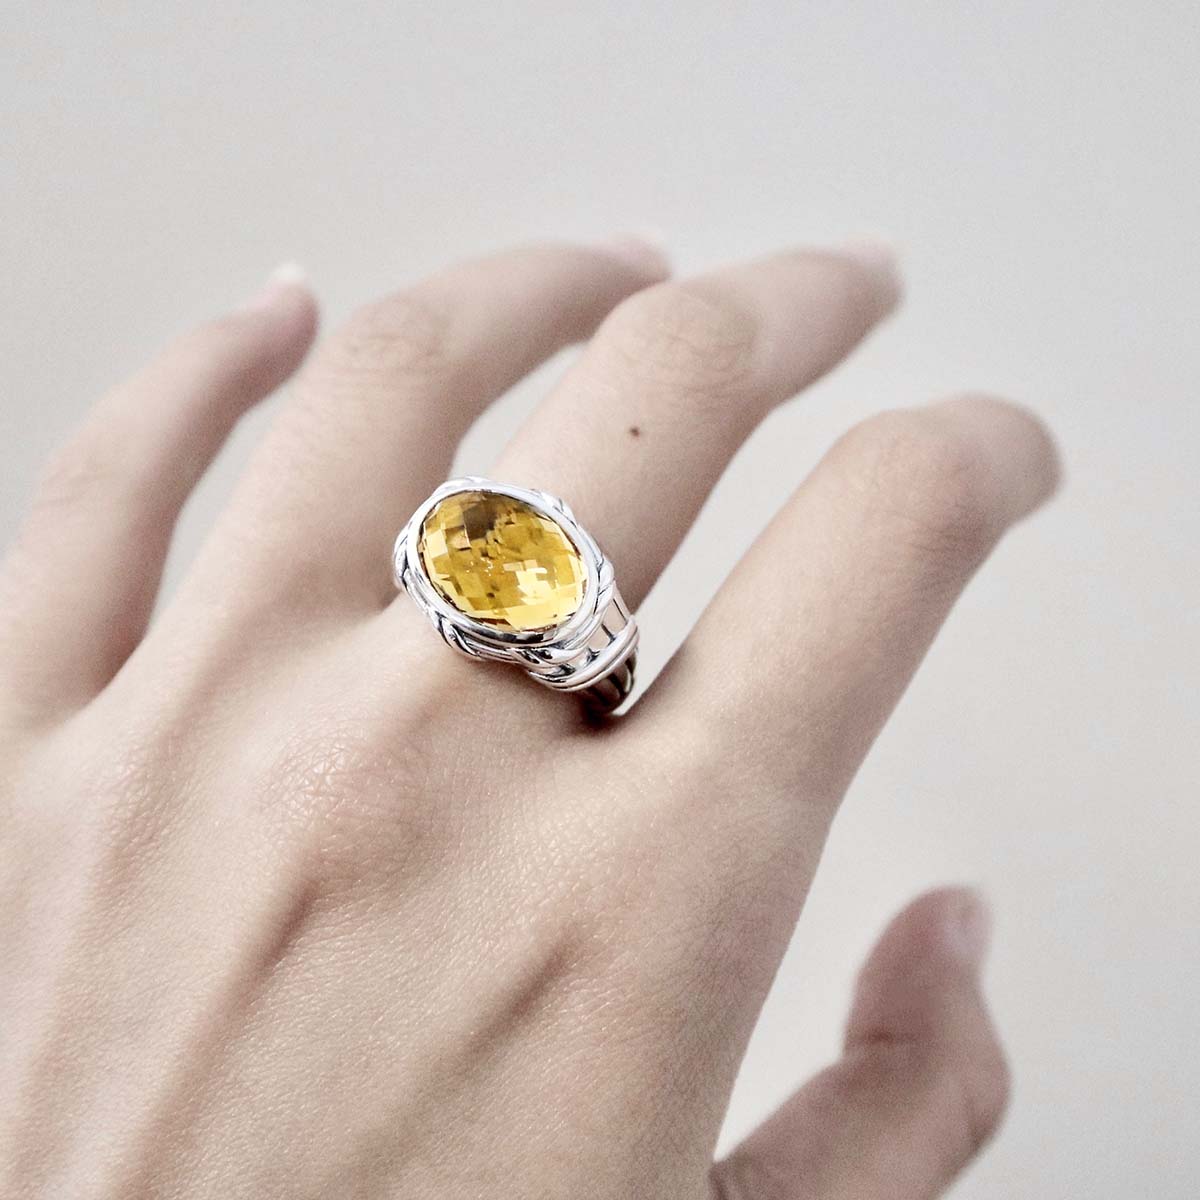 Reflections Statement Ring in sterling silver with citrine